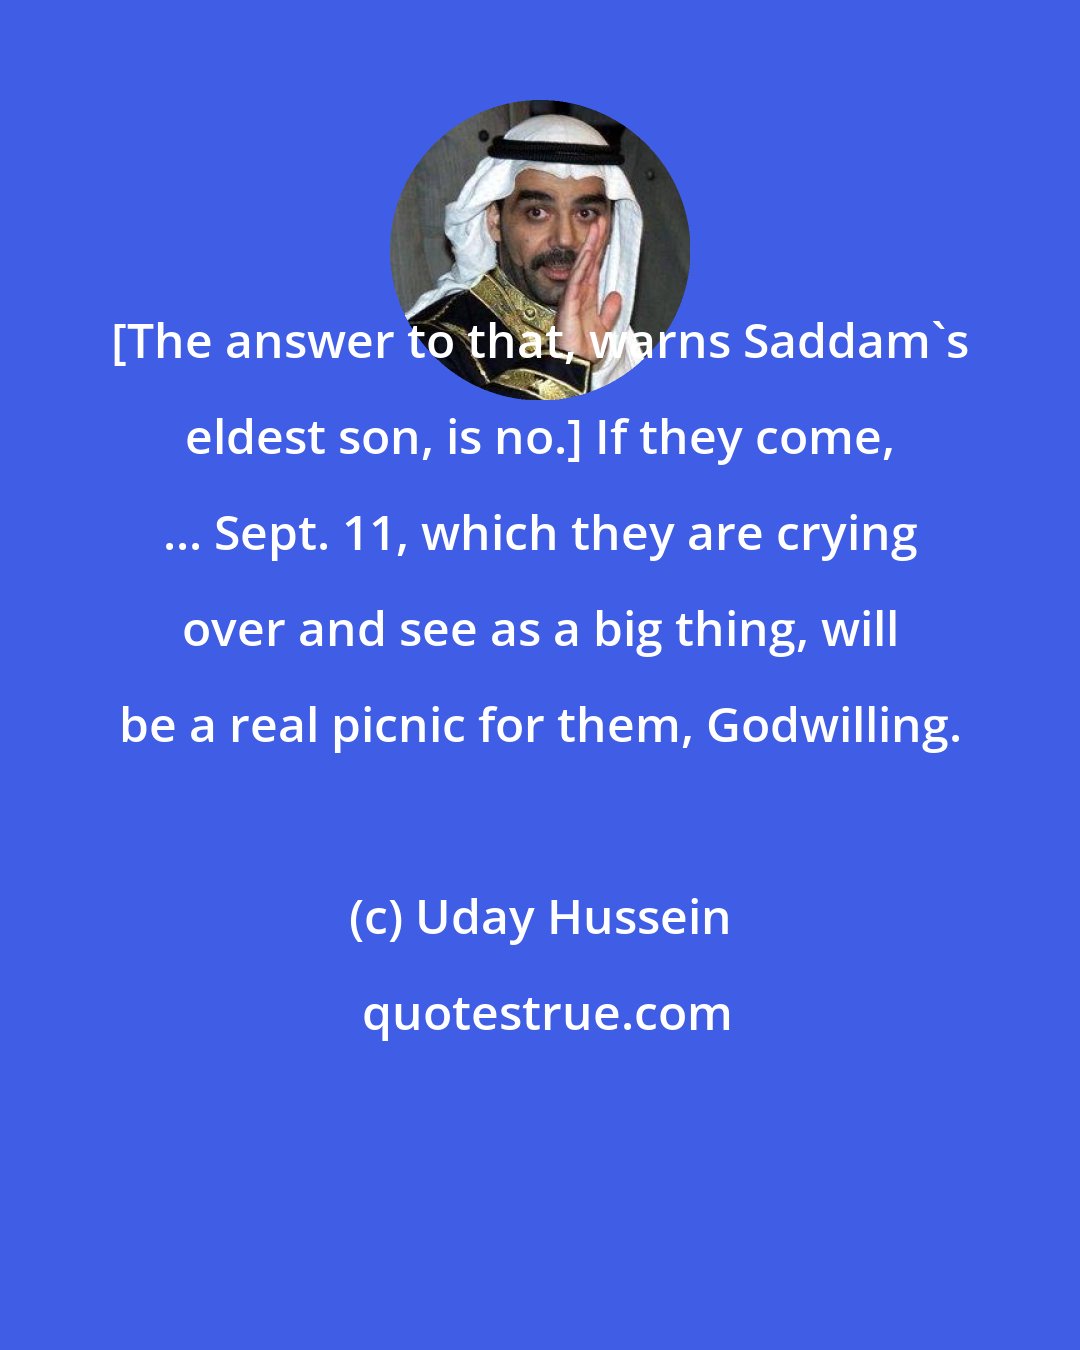 Uday Hussein: [The answer to that, warns Saddam's eldest son, is no.] If they come, ... Sept. 11, which they are crying over and see as a big thing, will be a real picnic for them, Godwilling.